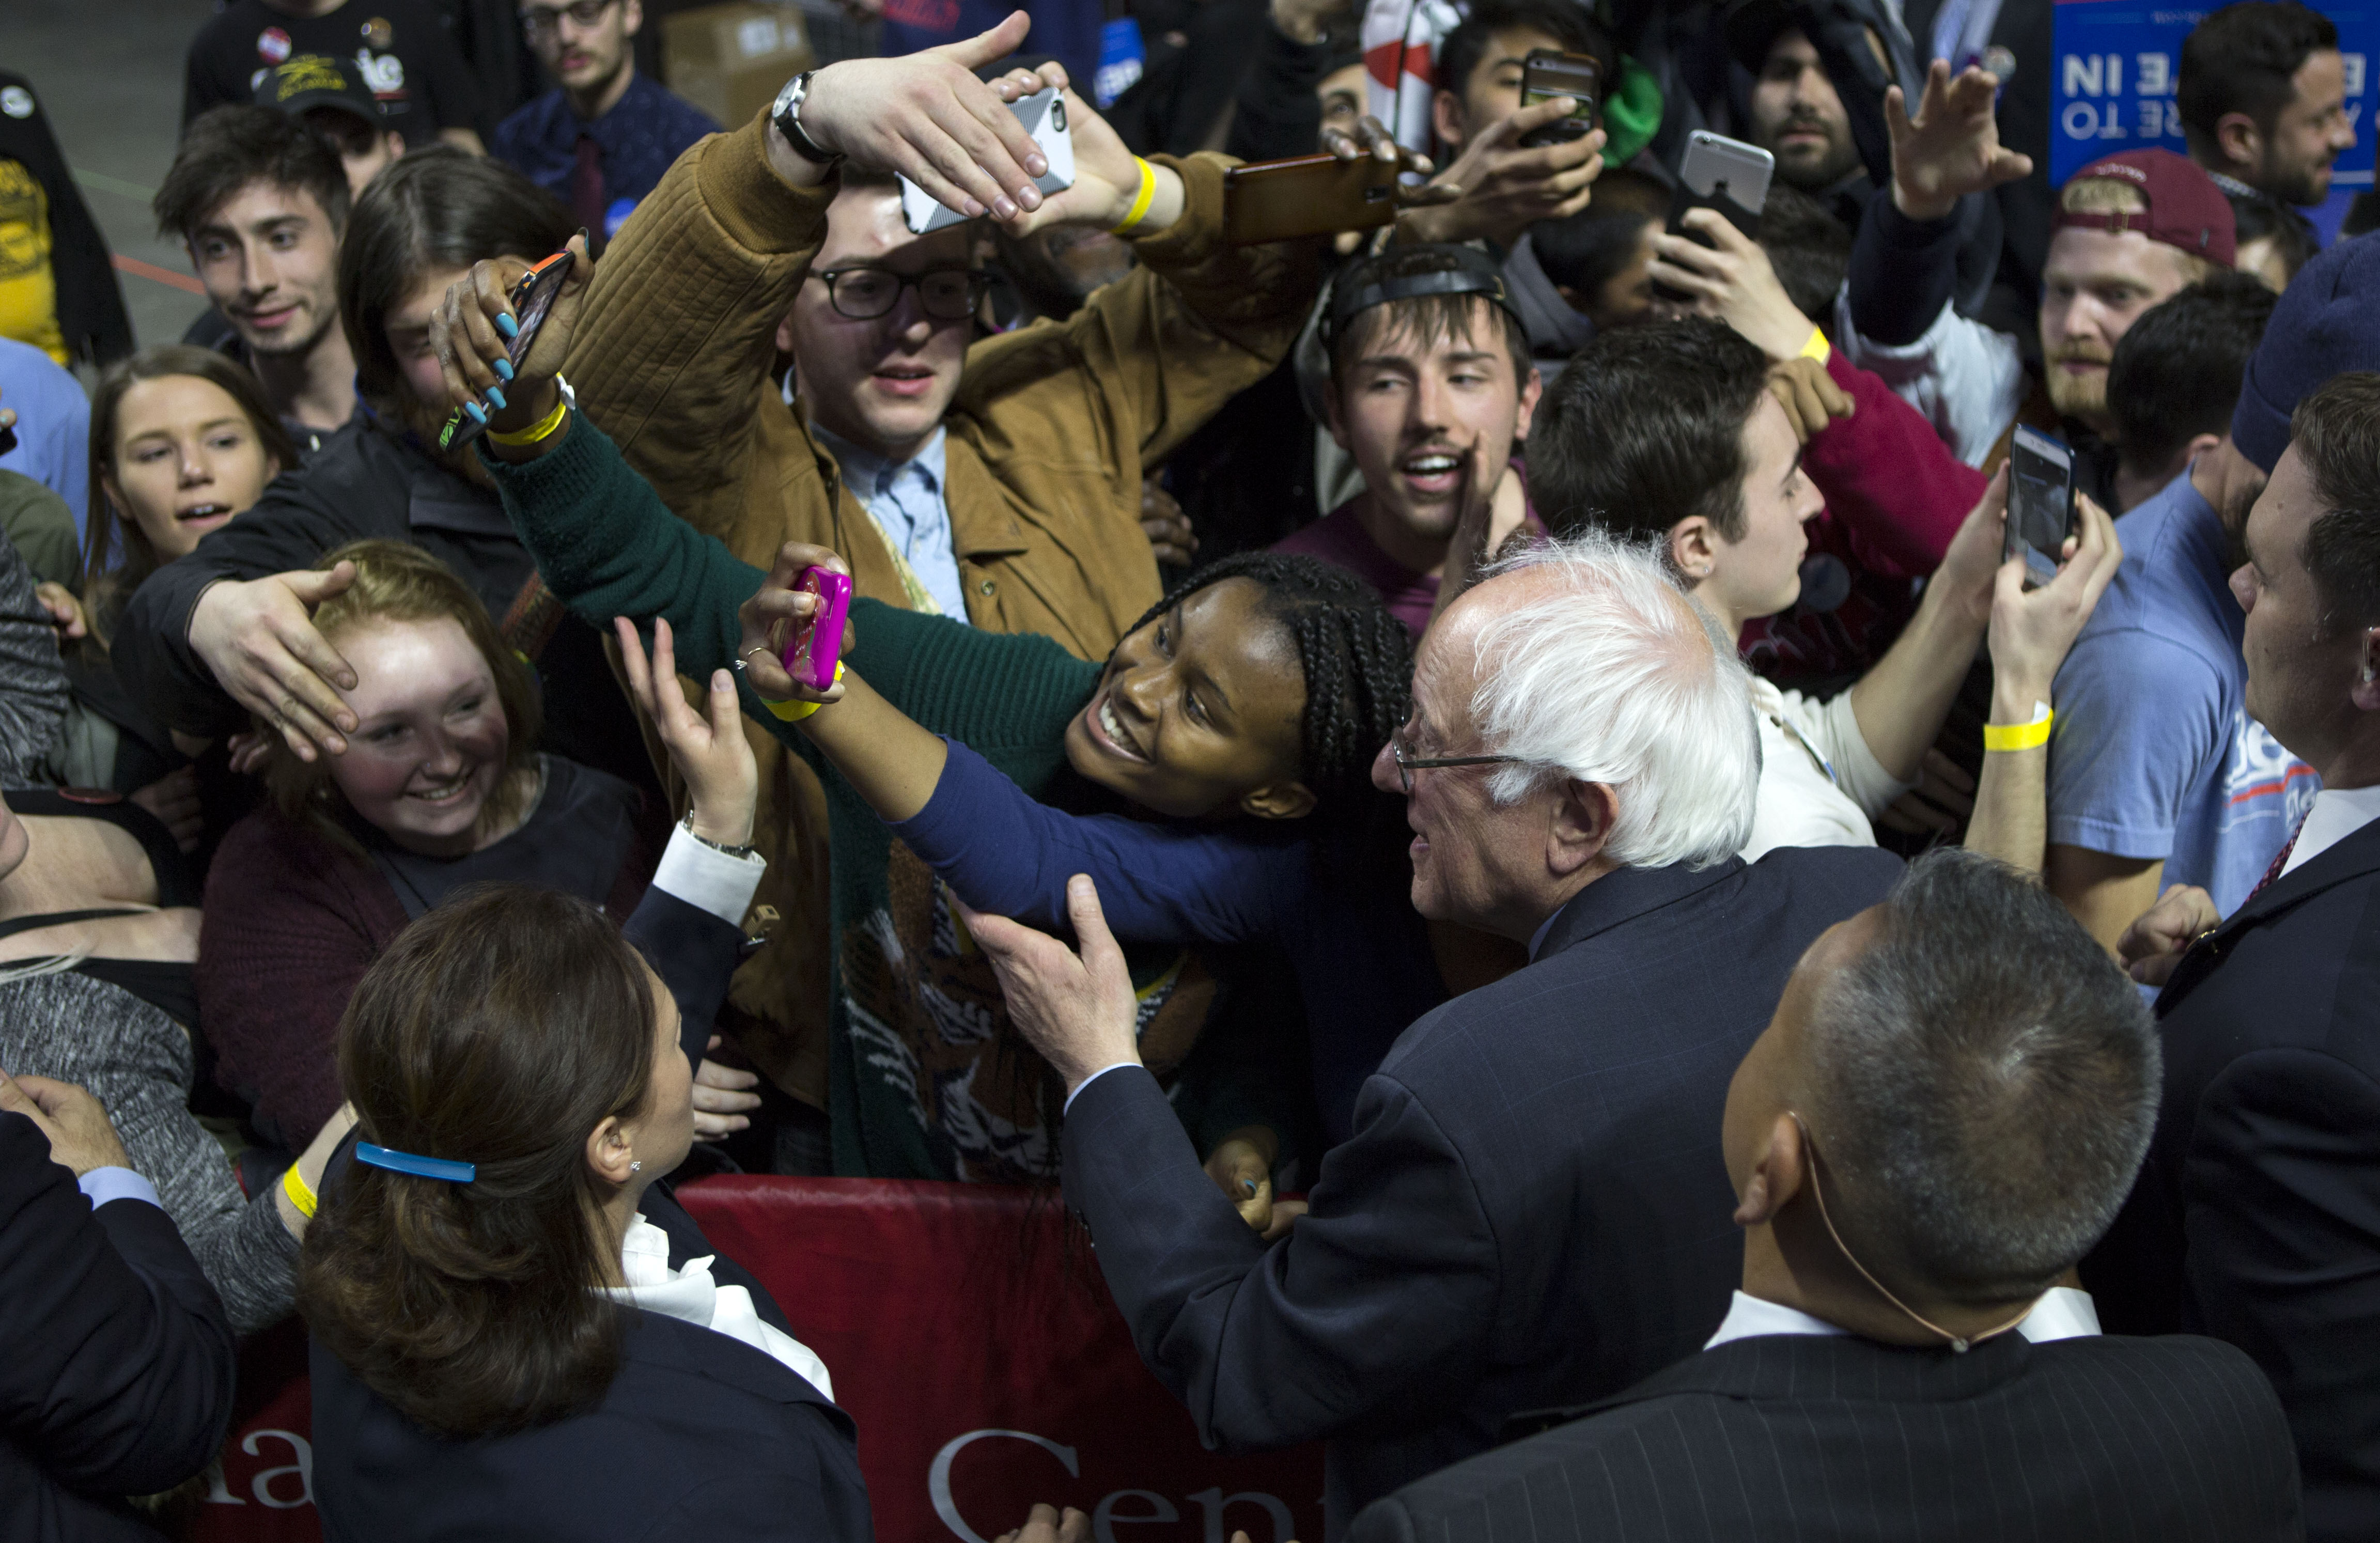 Sen. Bernie Sanders poses for a selfie with supporters at Temple University